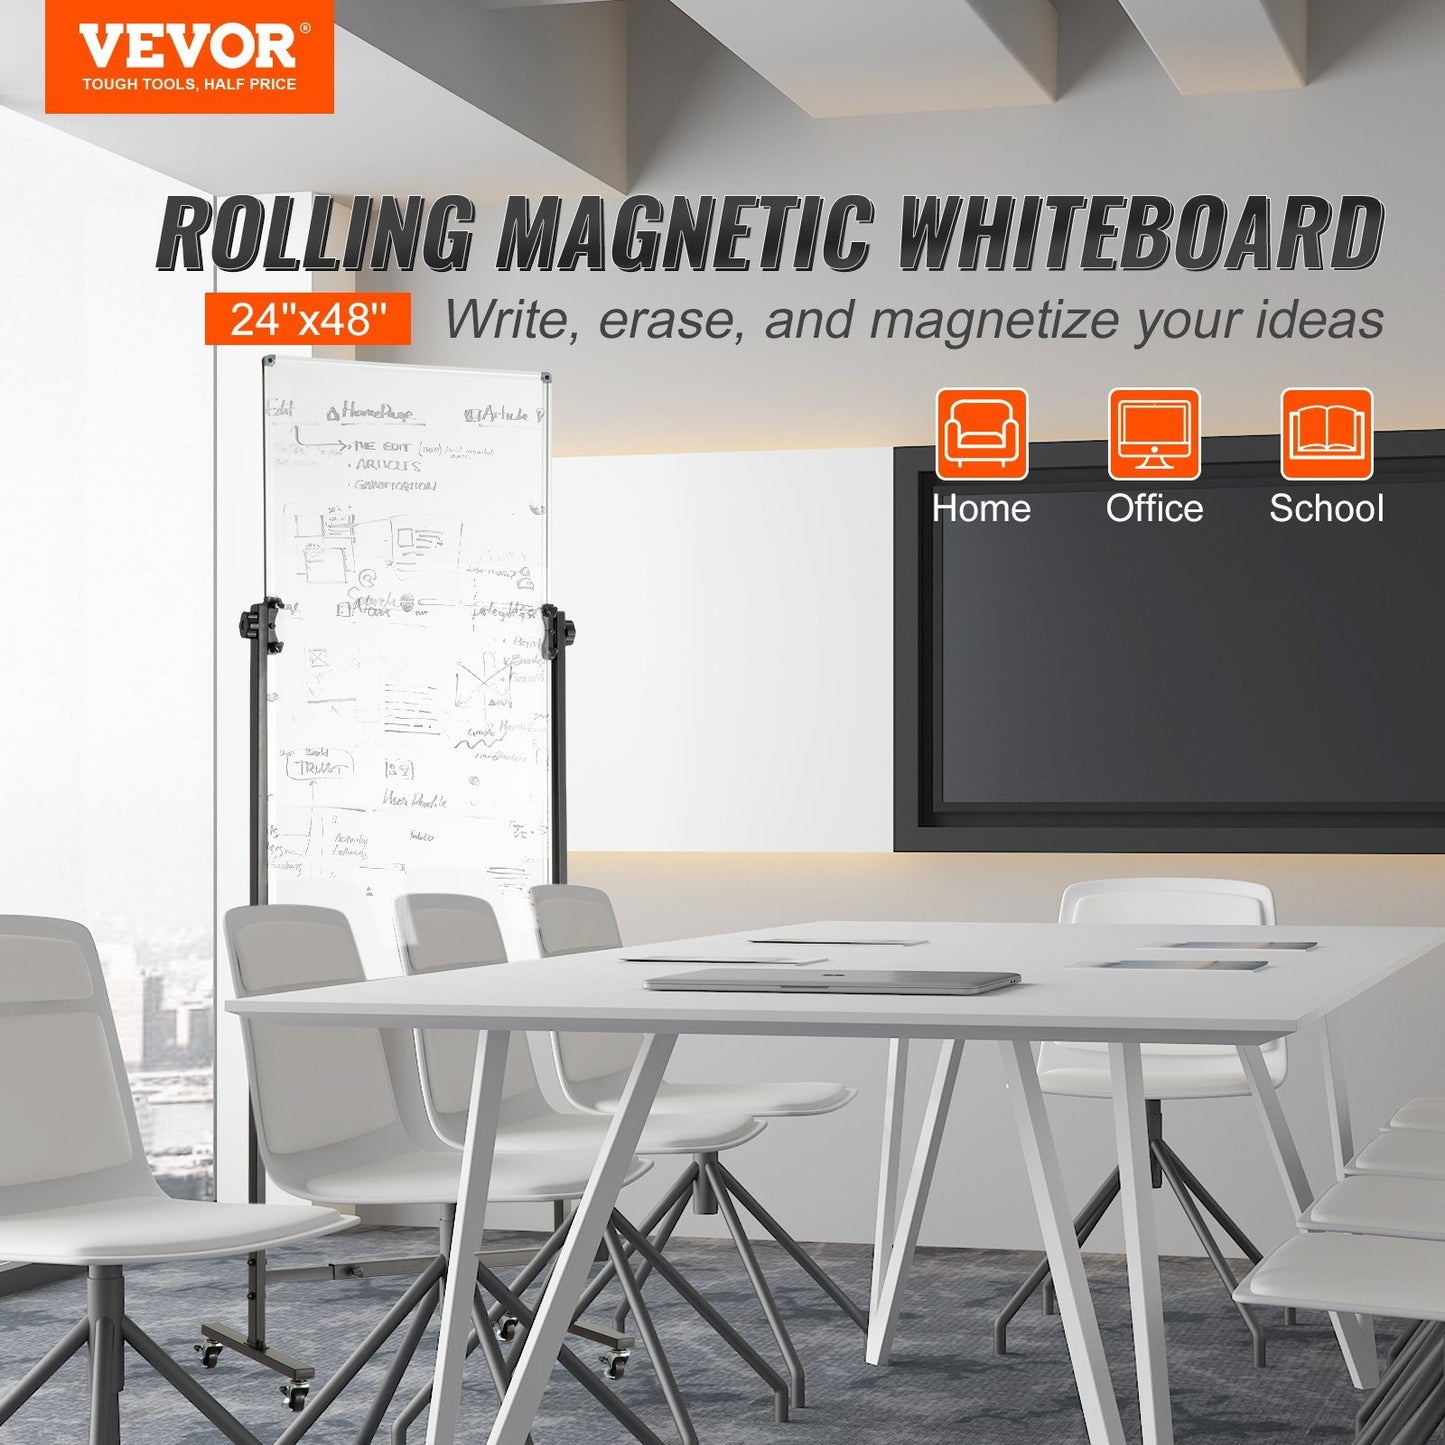 VEVOR Rolling Magnetic Whiteboard, Double-sided Mobile Whiteboard 24x48 Inches, Adjustable Height Dry Erase Board with Wheels, 1 Magnetic Erase & 3 Dry Erase Markers & Movable Tray for Office School